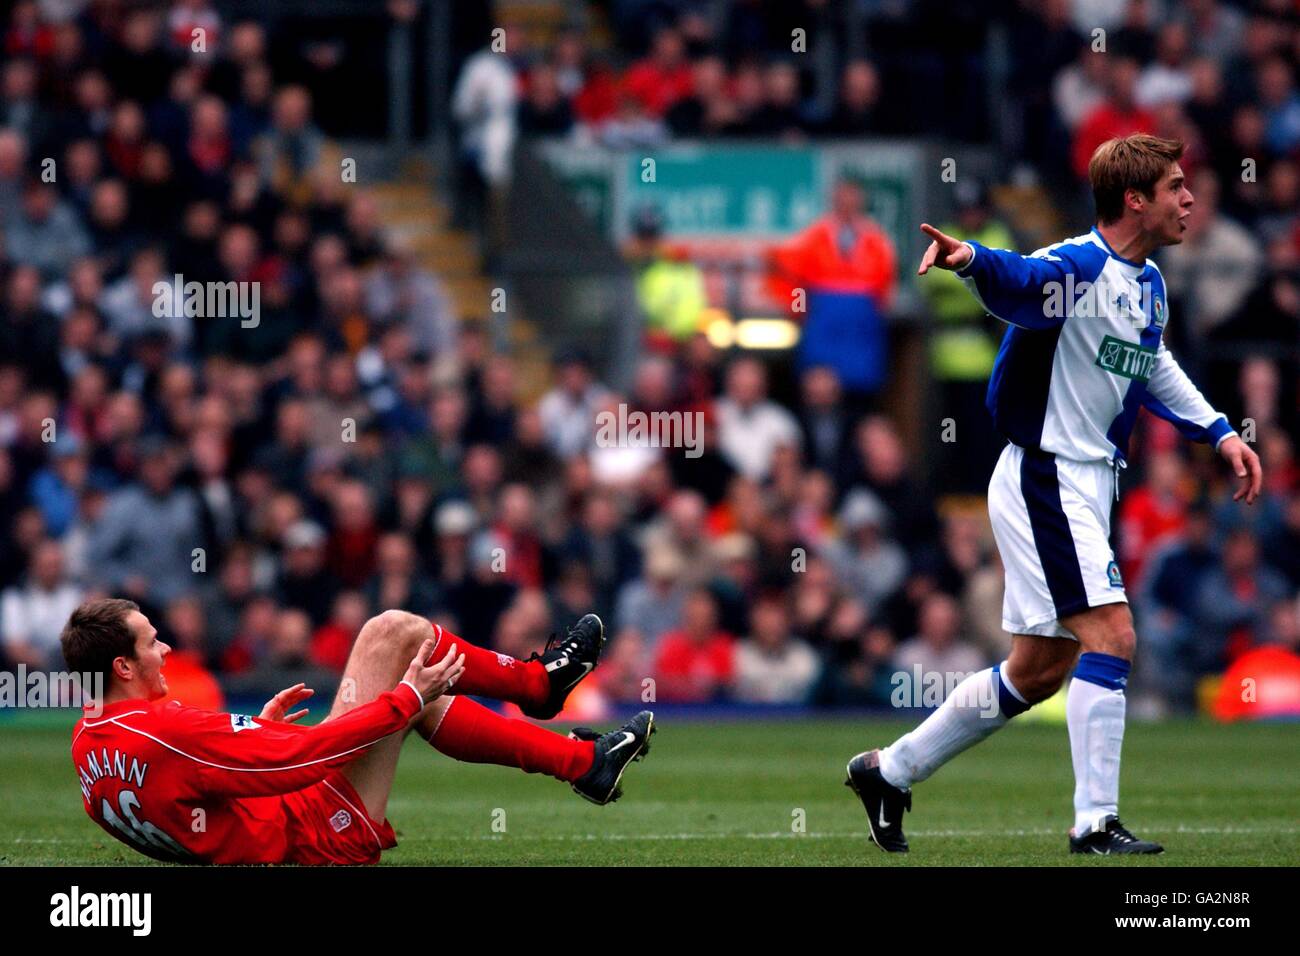 Soccer - FA Barclaycard Premiership - Blackburn Rovers v Liverpool. Liverpool's Dieter Hamann is knocked to the ground by Blackburn Rovers' Garry Flitcroft Stock Photo